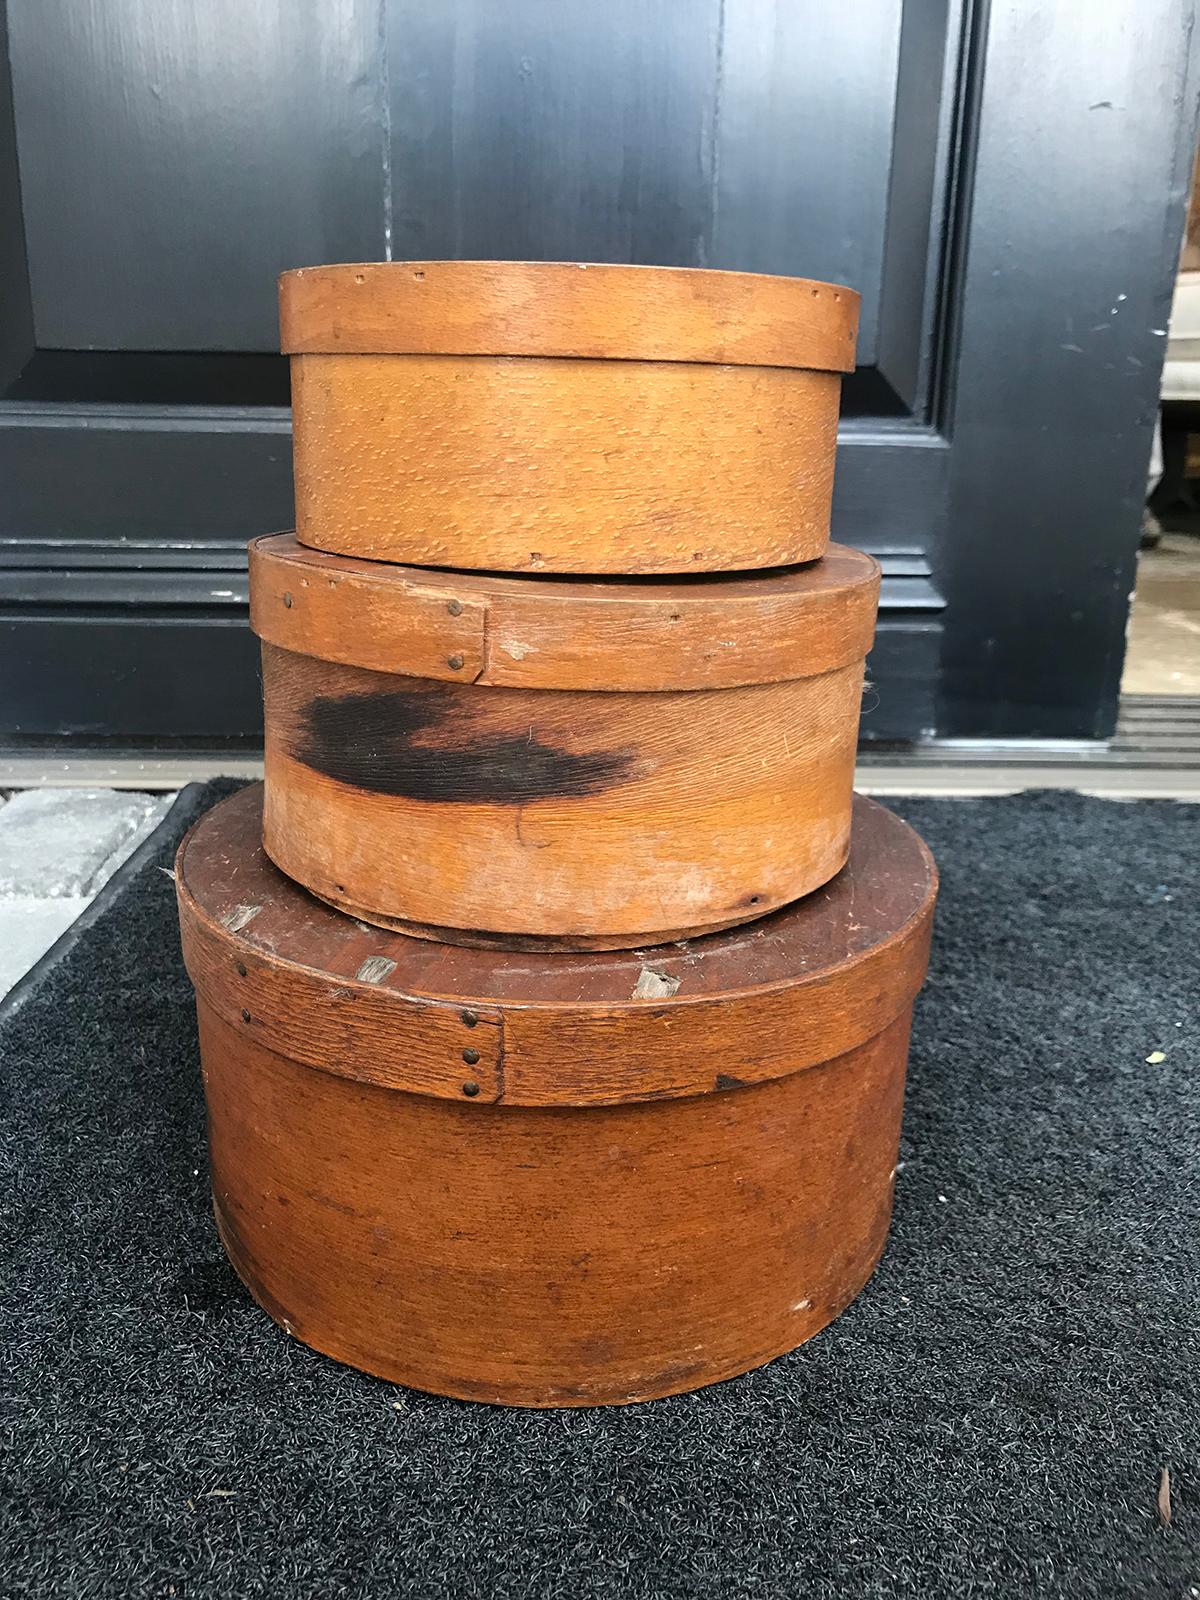 Set of three 19th century American pantry boxes
Measures: Small 6.75